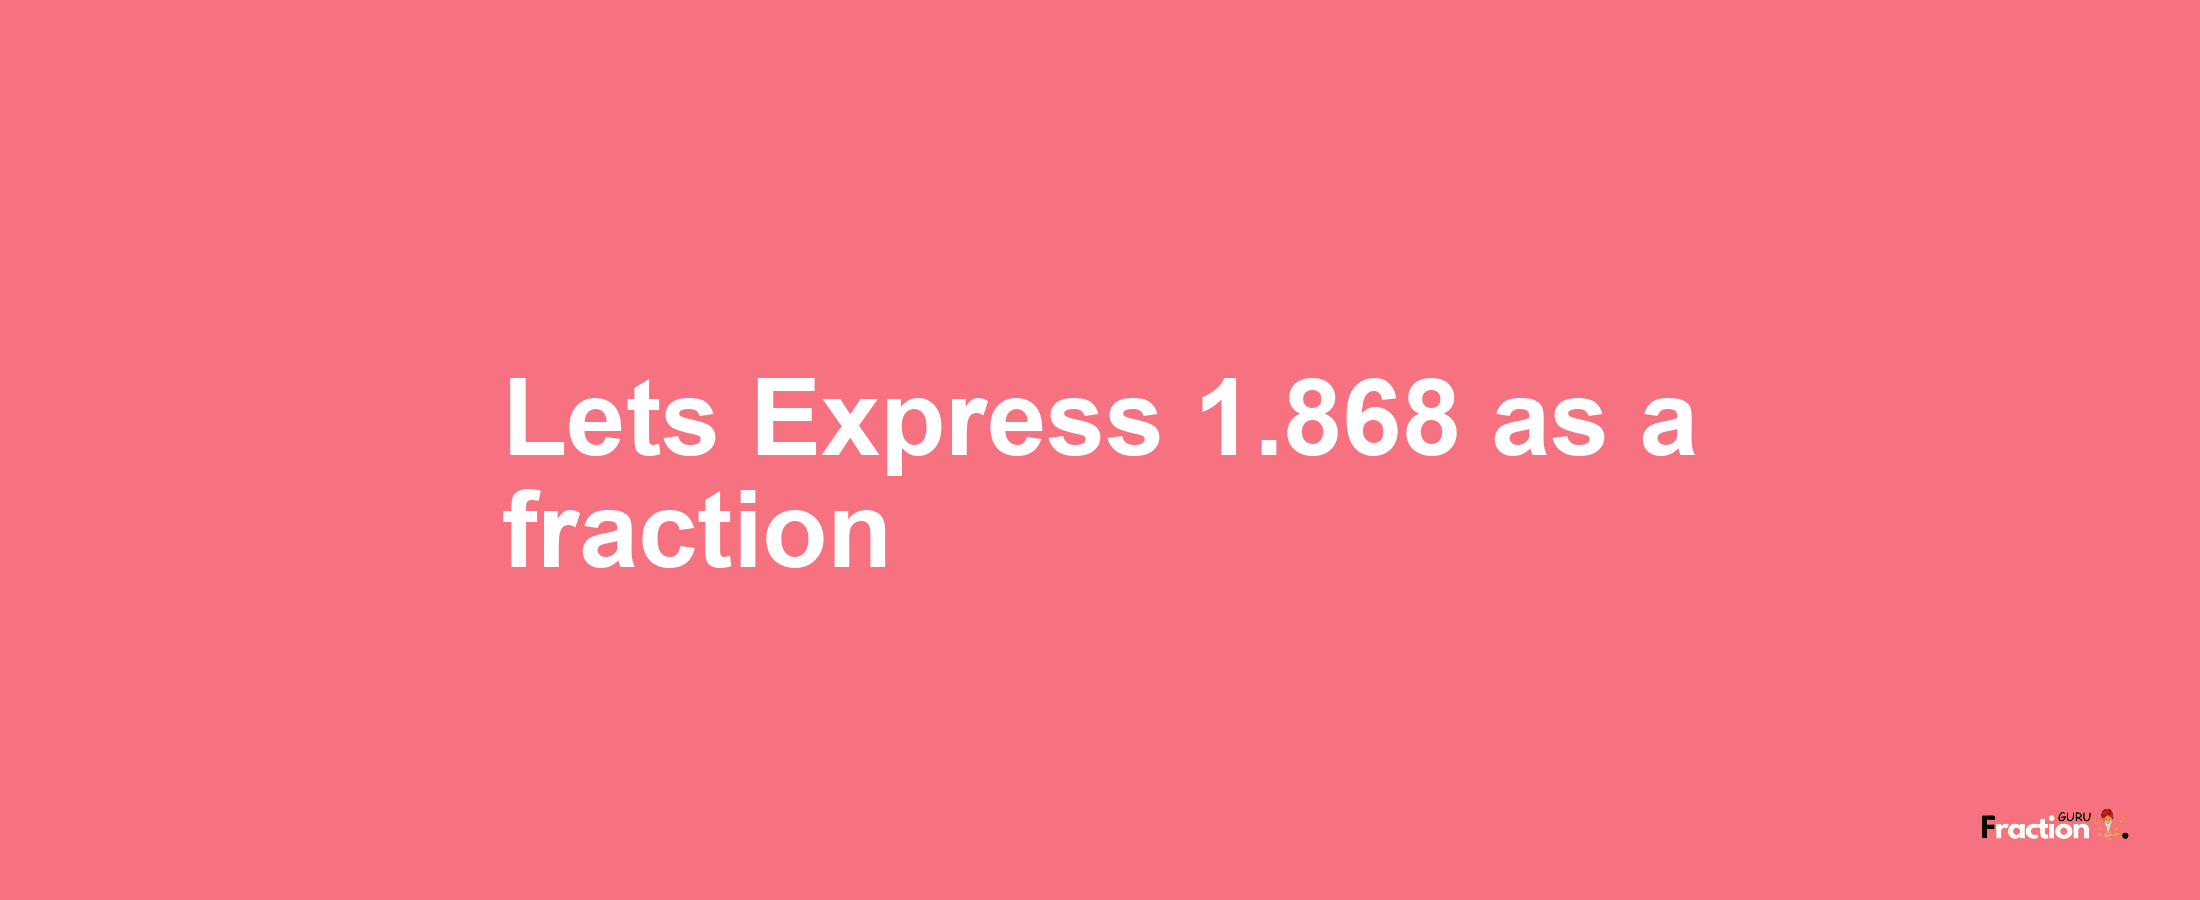 Lets Express 1.868 as afraction